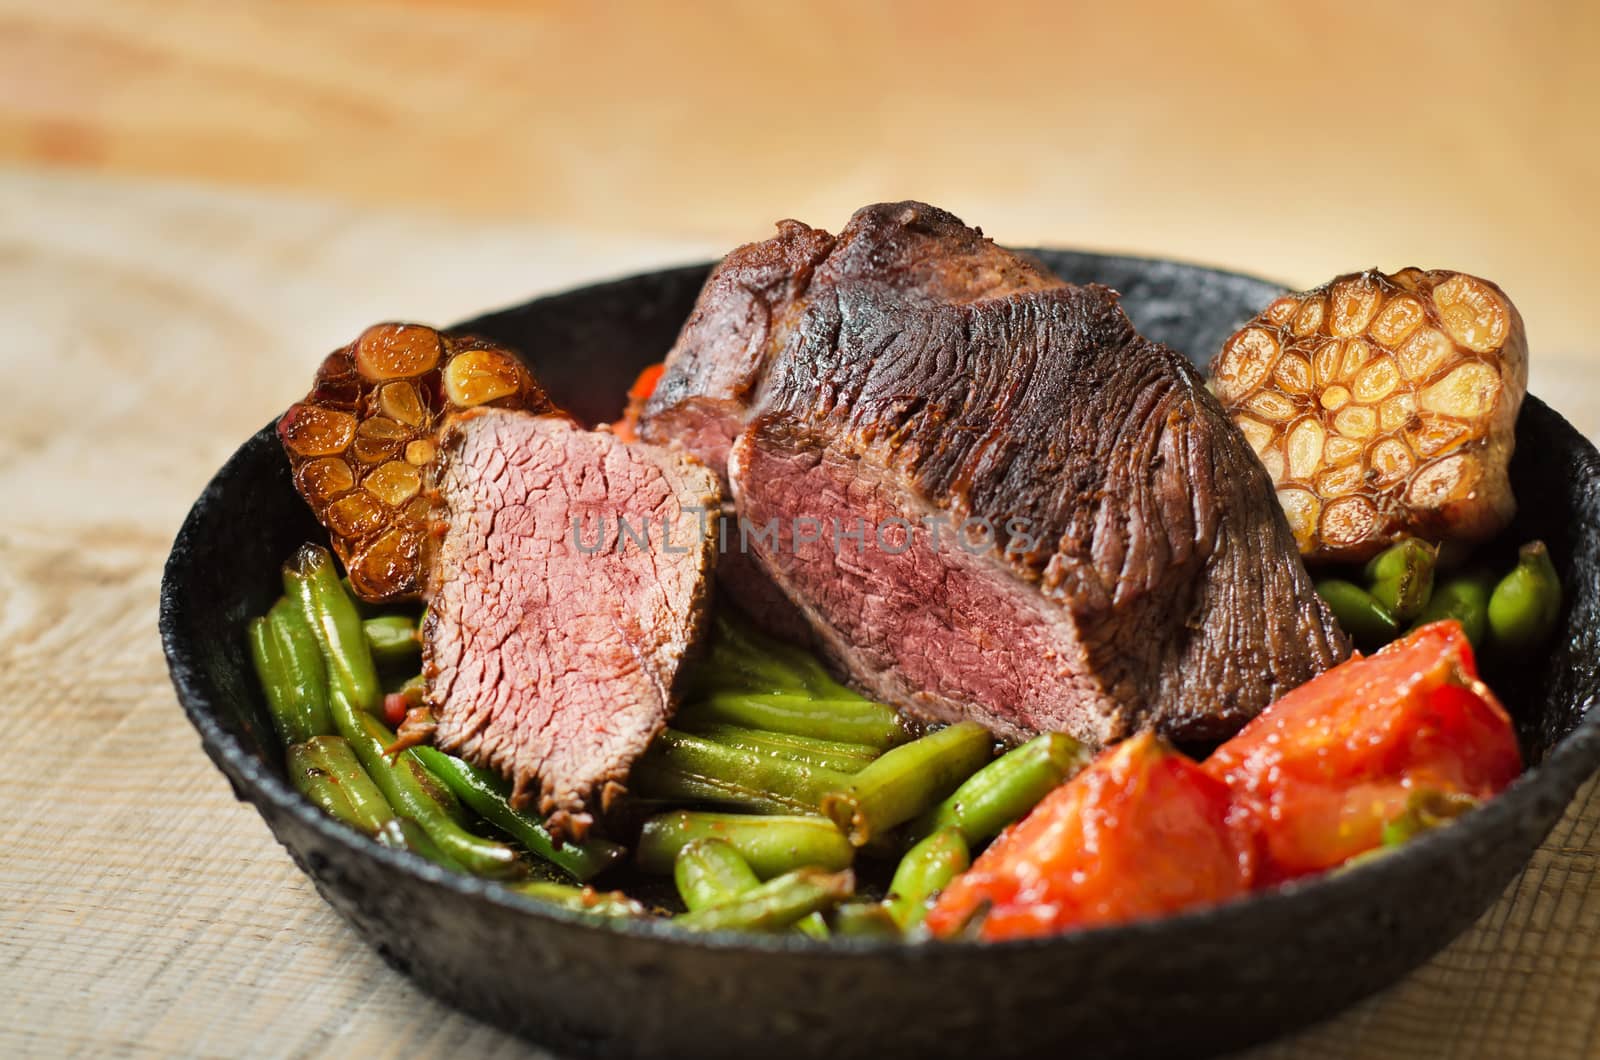 Roast beef with vegetables in a cast iron skillet and boards. Cut the meat, garlic,green beans,tomatoes and bokeh.